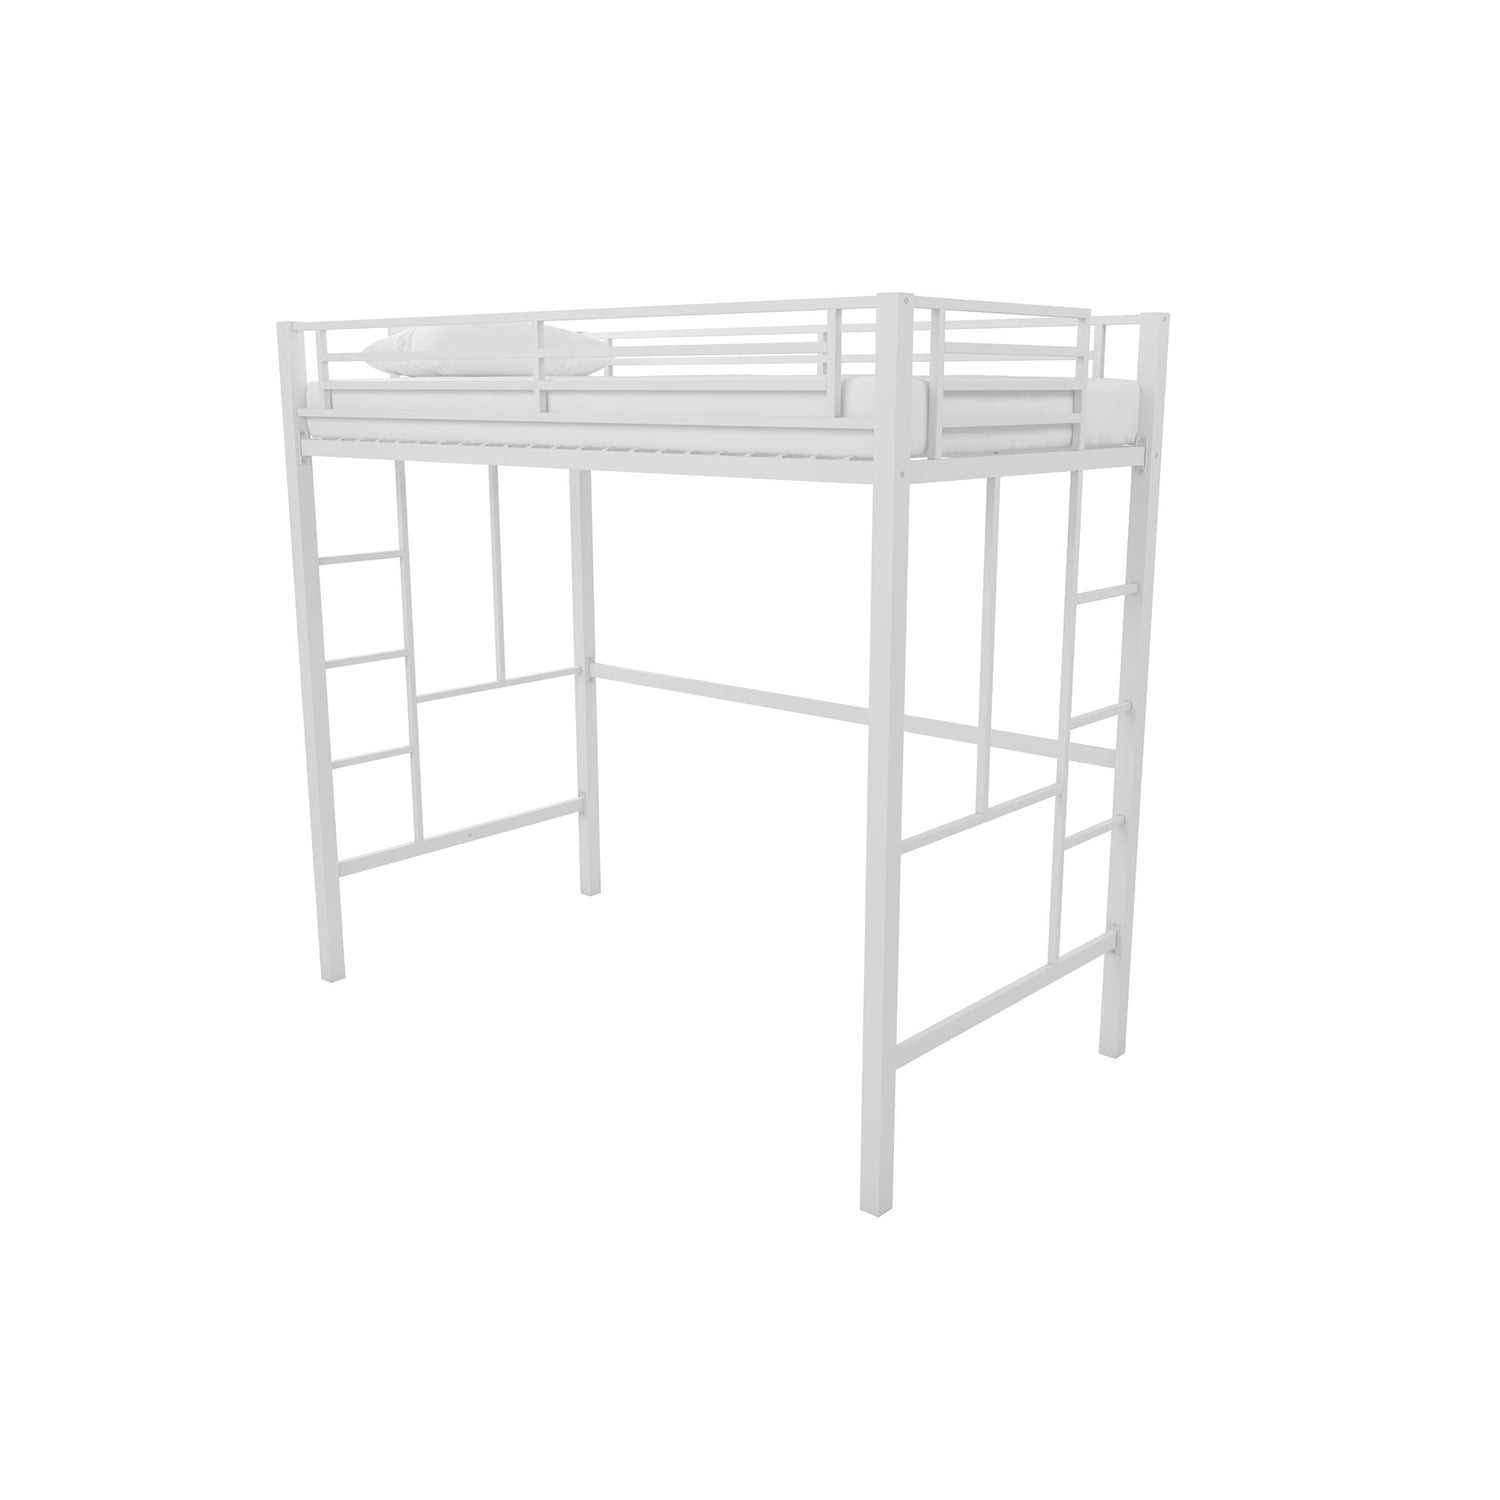 your zone loft bed